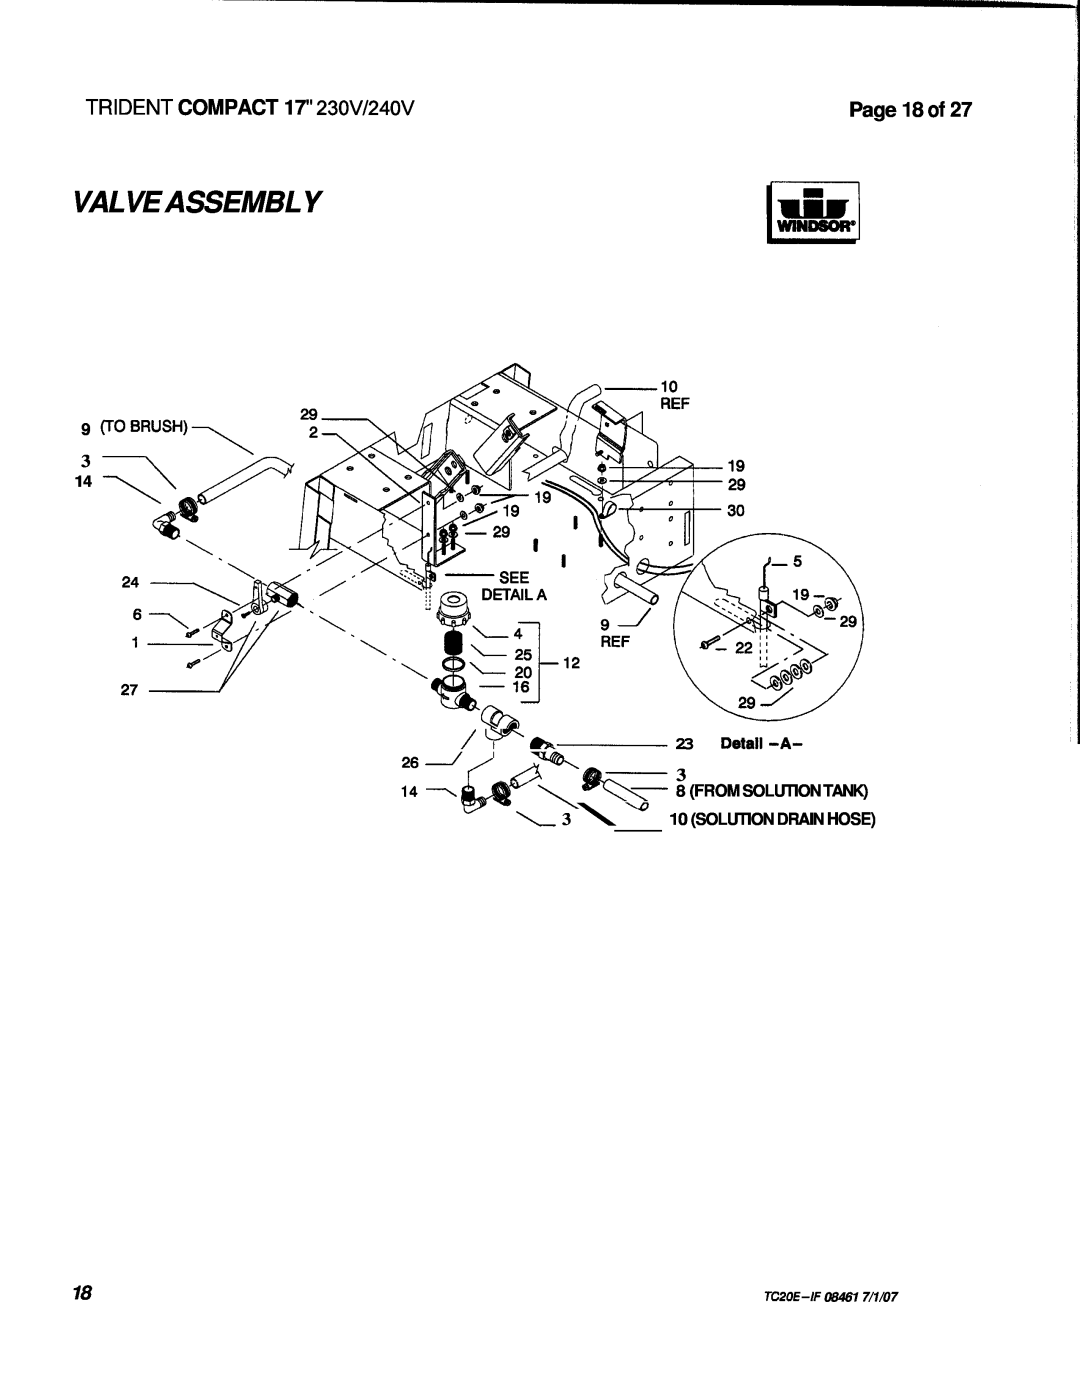 Windsor Valve Assembly, Page 18 of, TRIDENT COMPACT 17 230V/240V, F A23 Detall -A, TC2OE-IF08461 7/1/07 